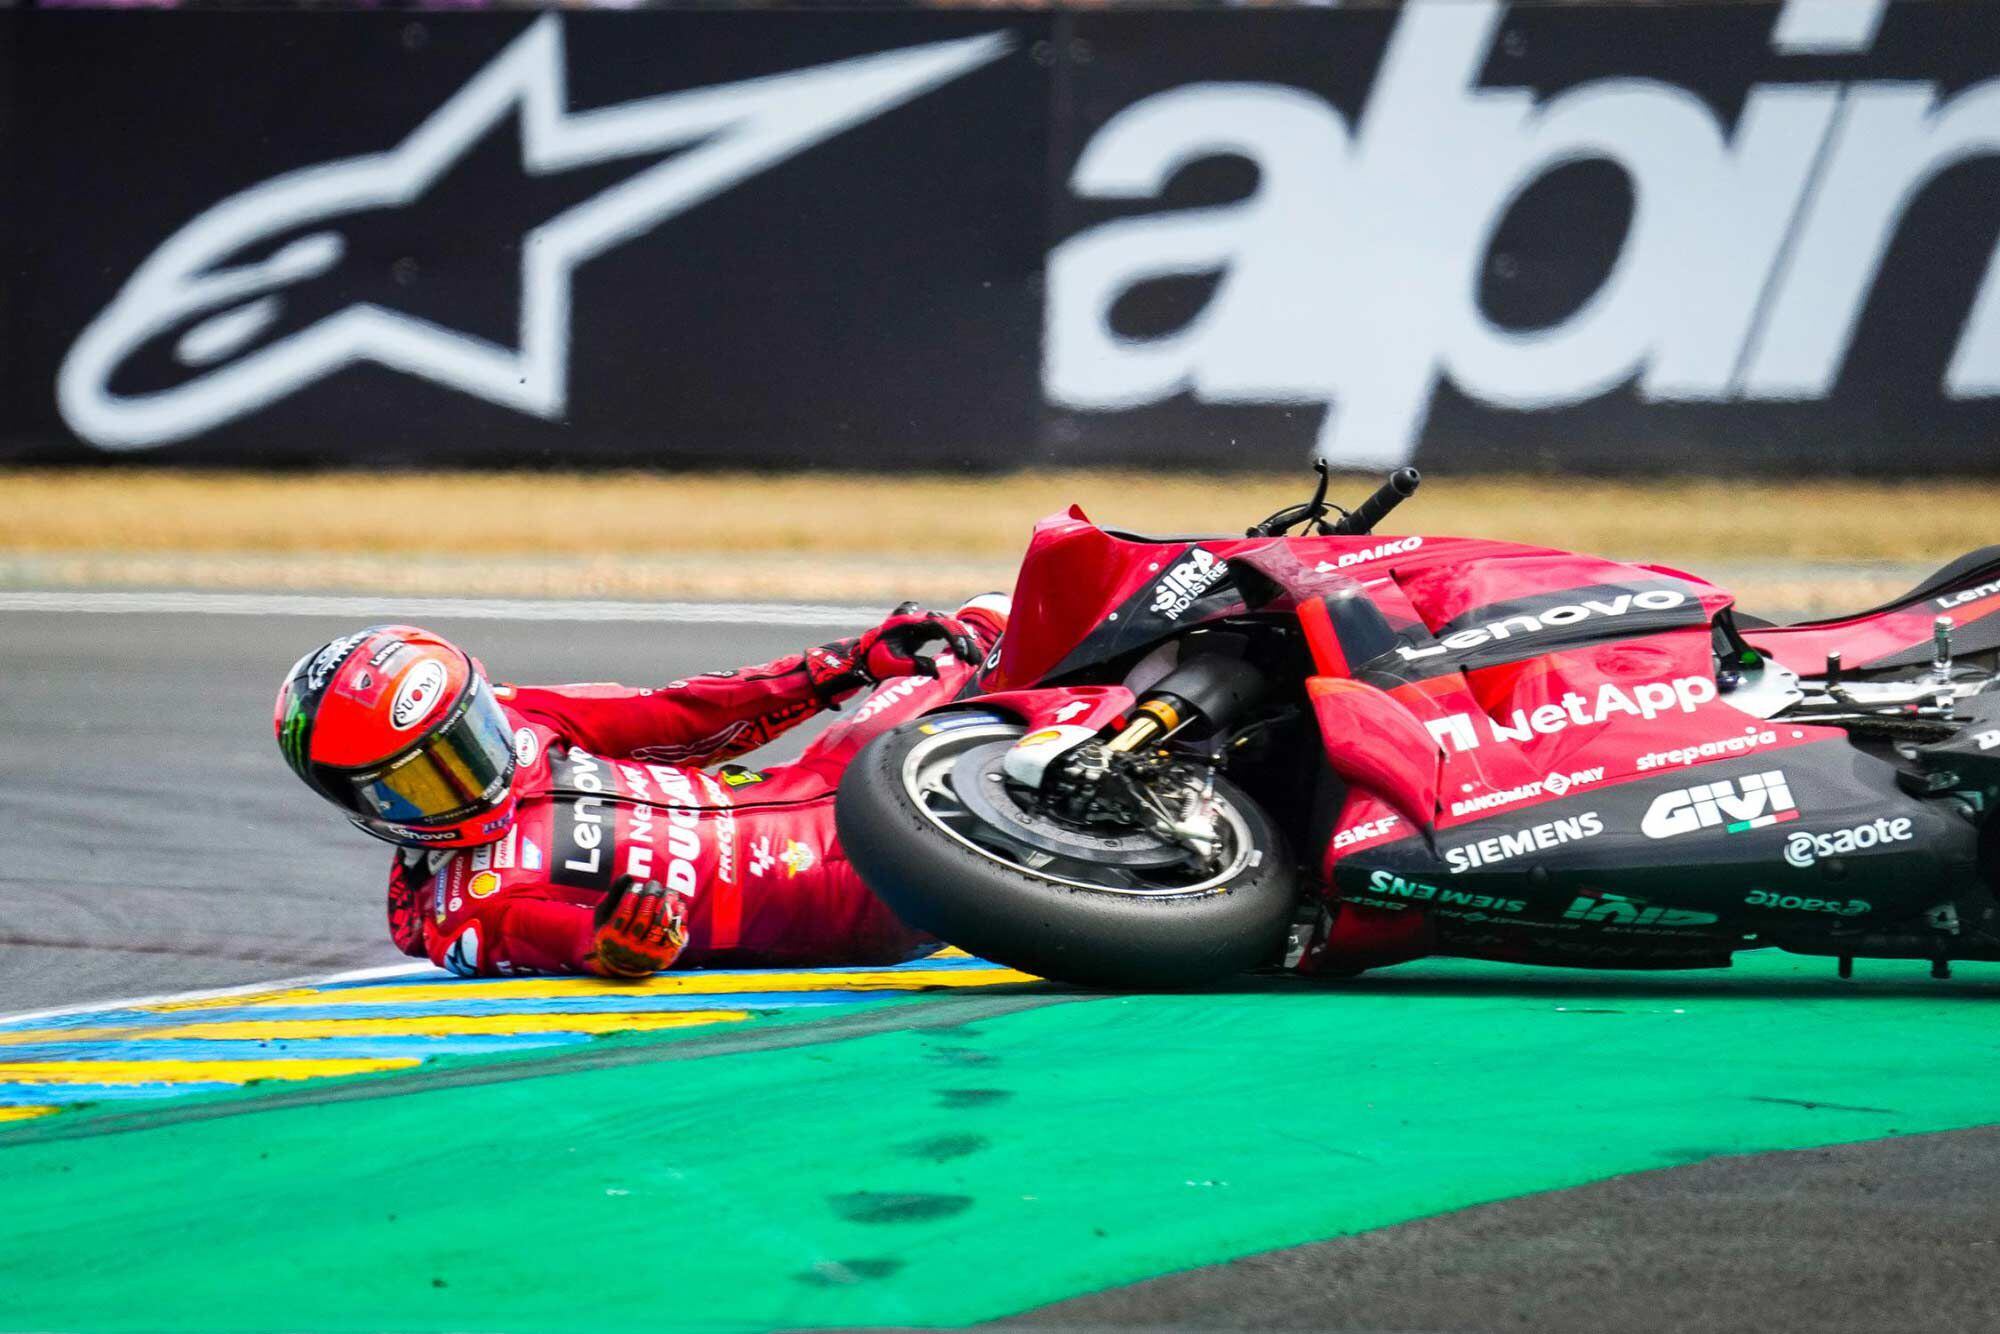 Le Mans was a crashfest, with six riders failing to finish. In qualifying, Francesco Bagnaia was golden, winning the pole and setting a new lap record. But on lap 21 his luck ran out while fighting for the lead. The DNF dropped him to seventh in the overall standings.